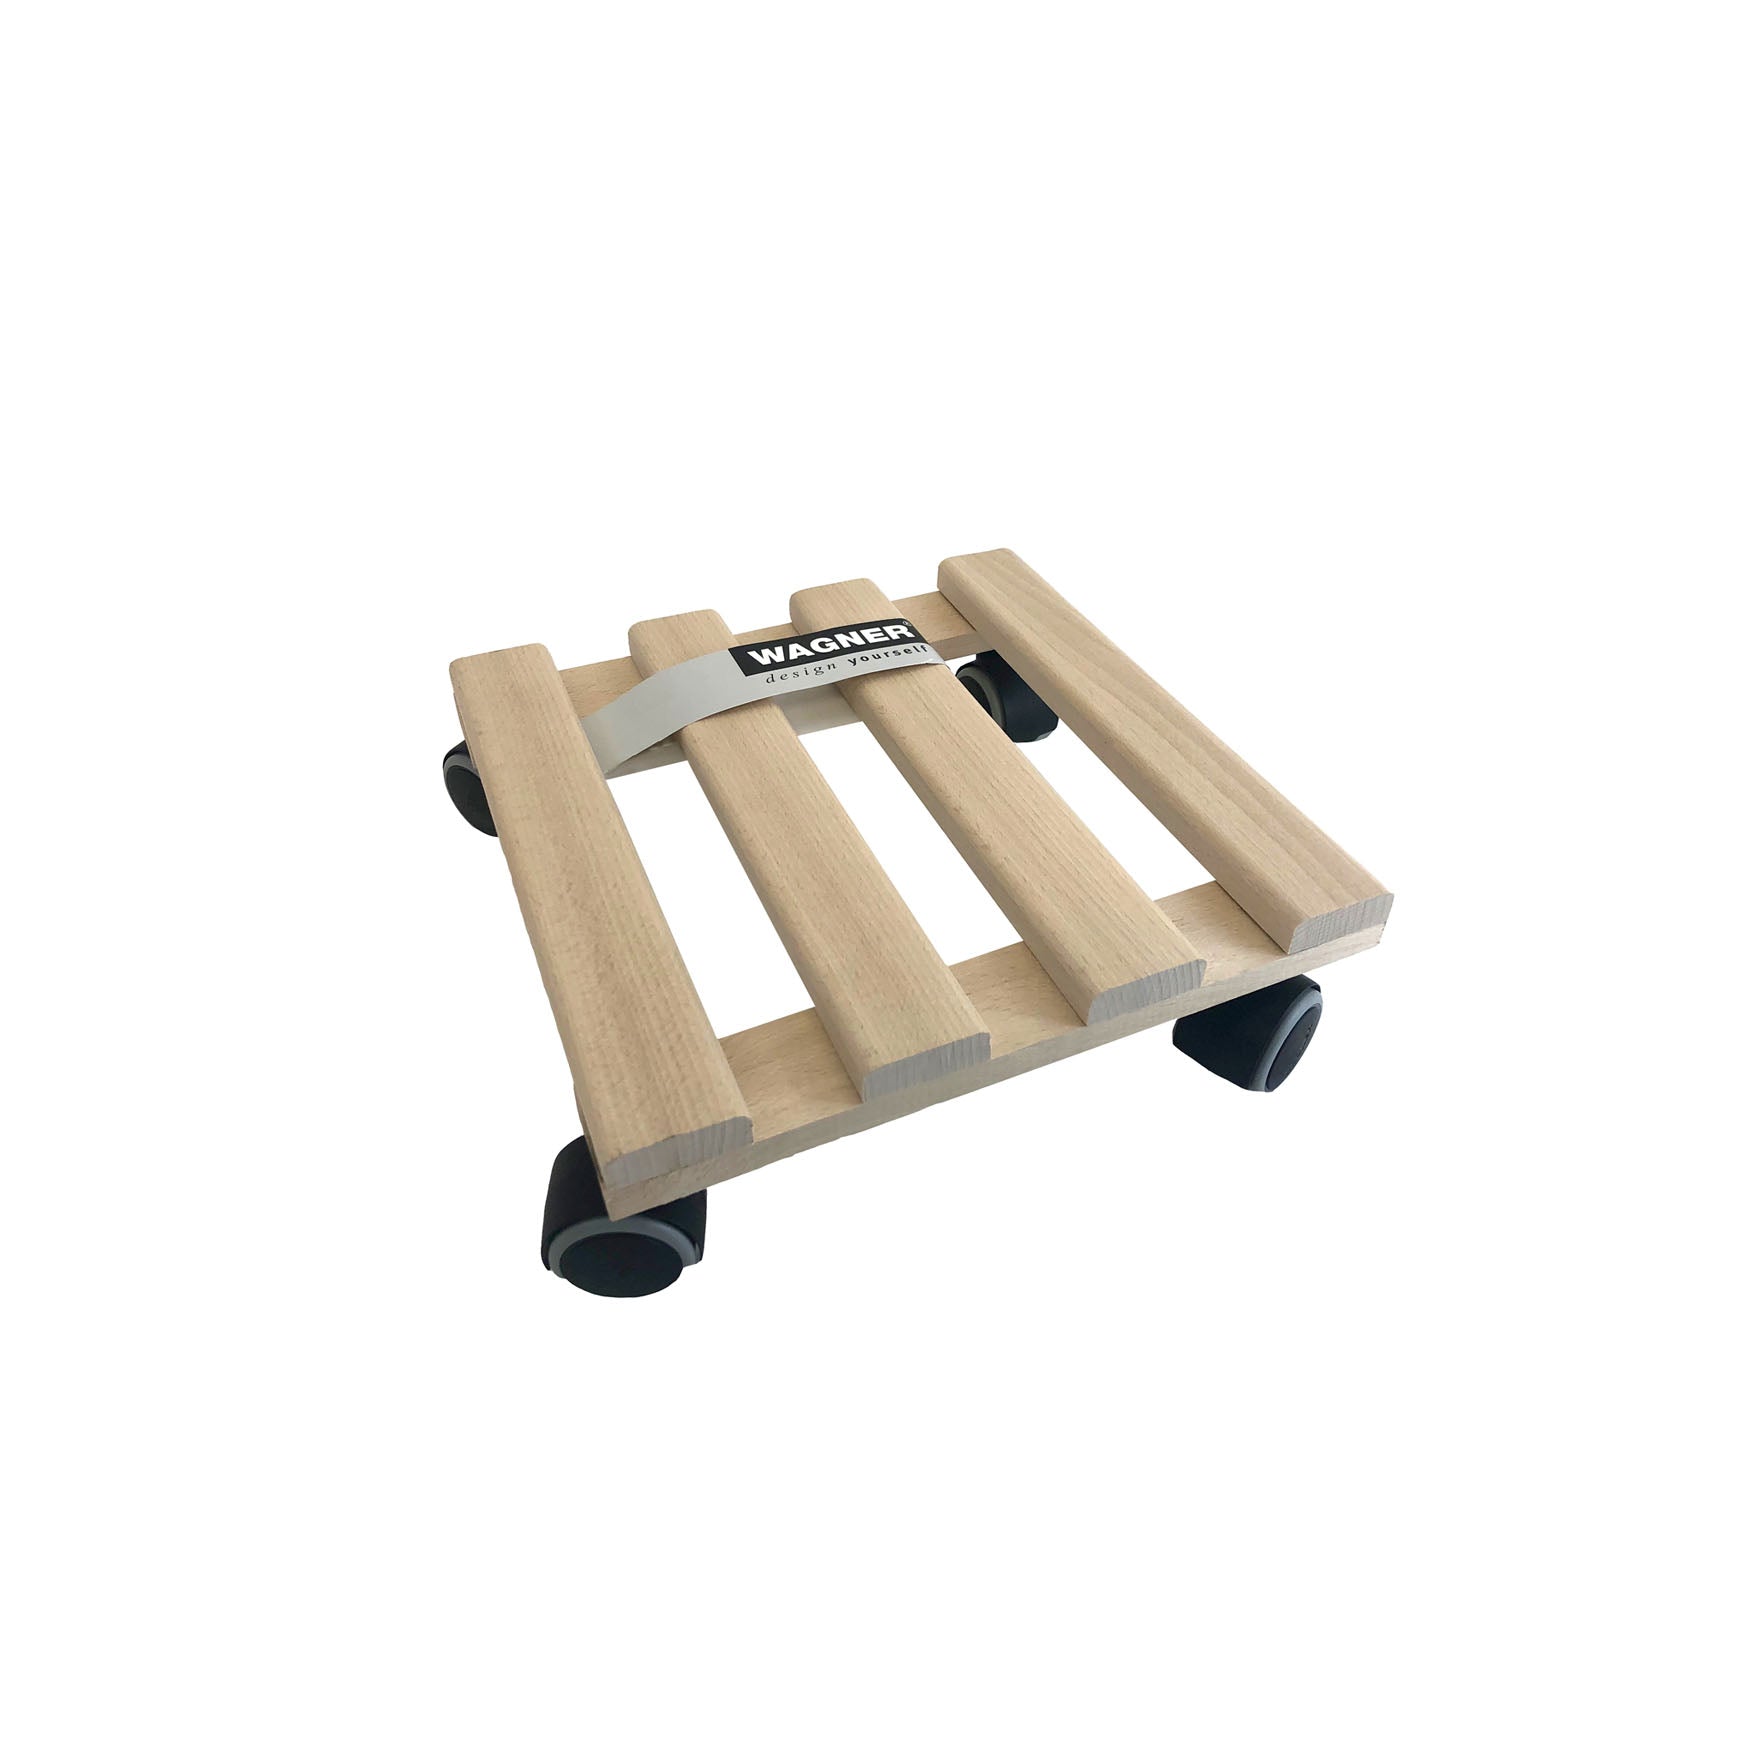 10" natural square wooden plant caddy. Made from beech wood. 220 lbs. capacity. 9.8"D x 3.2"H 1.65 lbs.